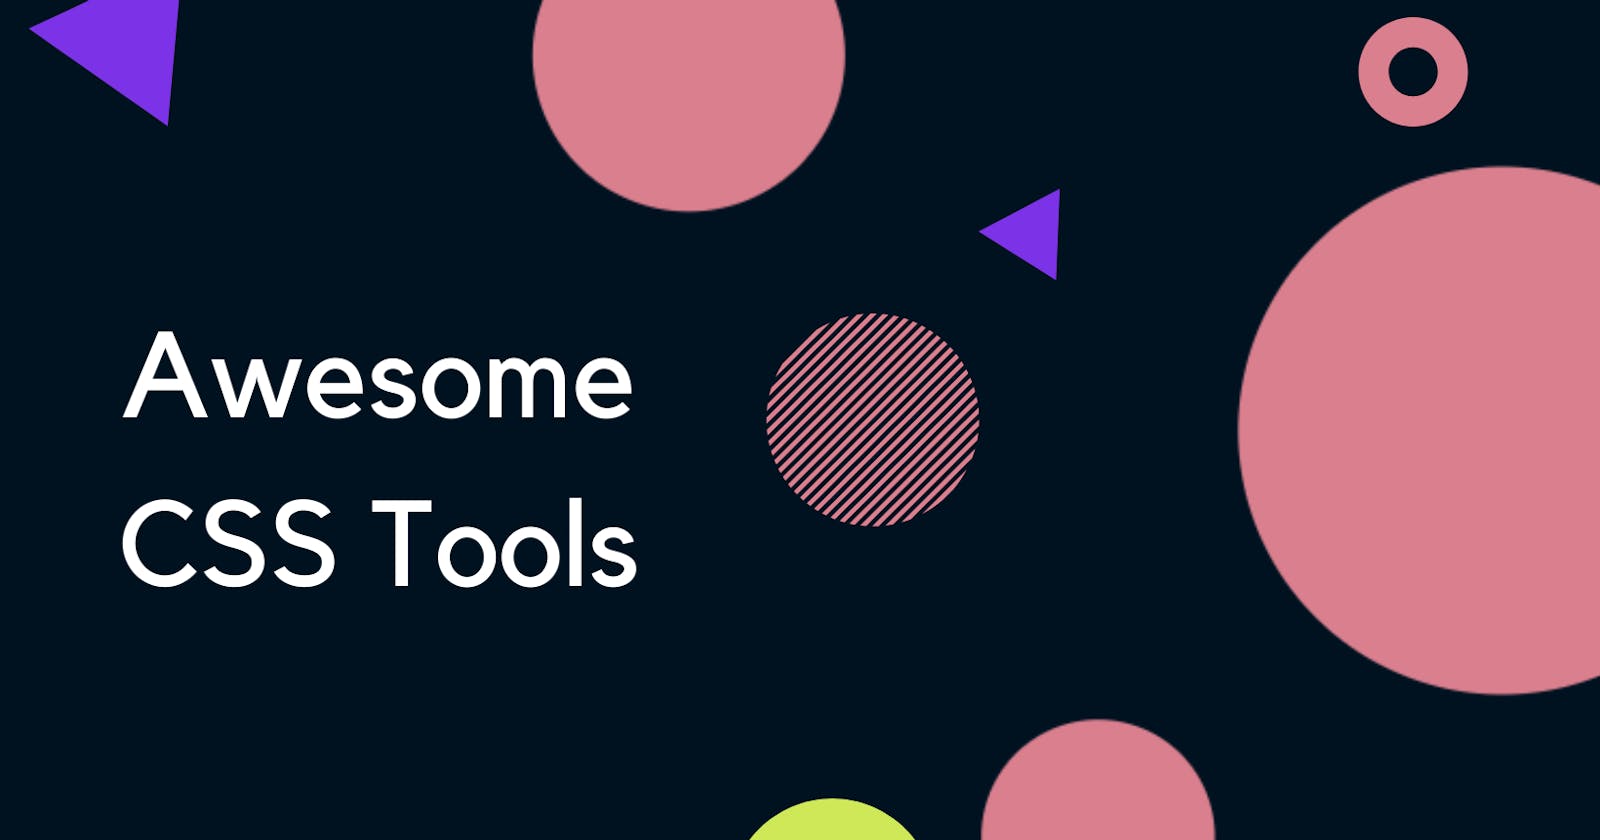 Awesome CSS Tools to Maximize Your Design